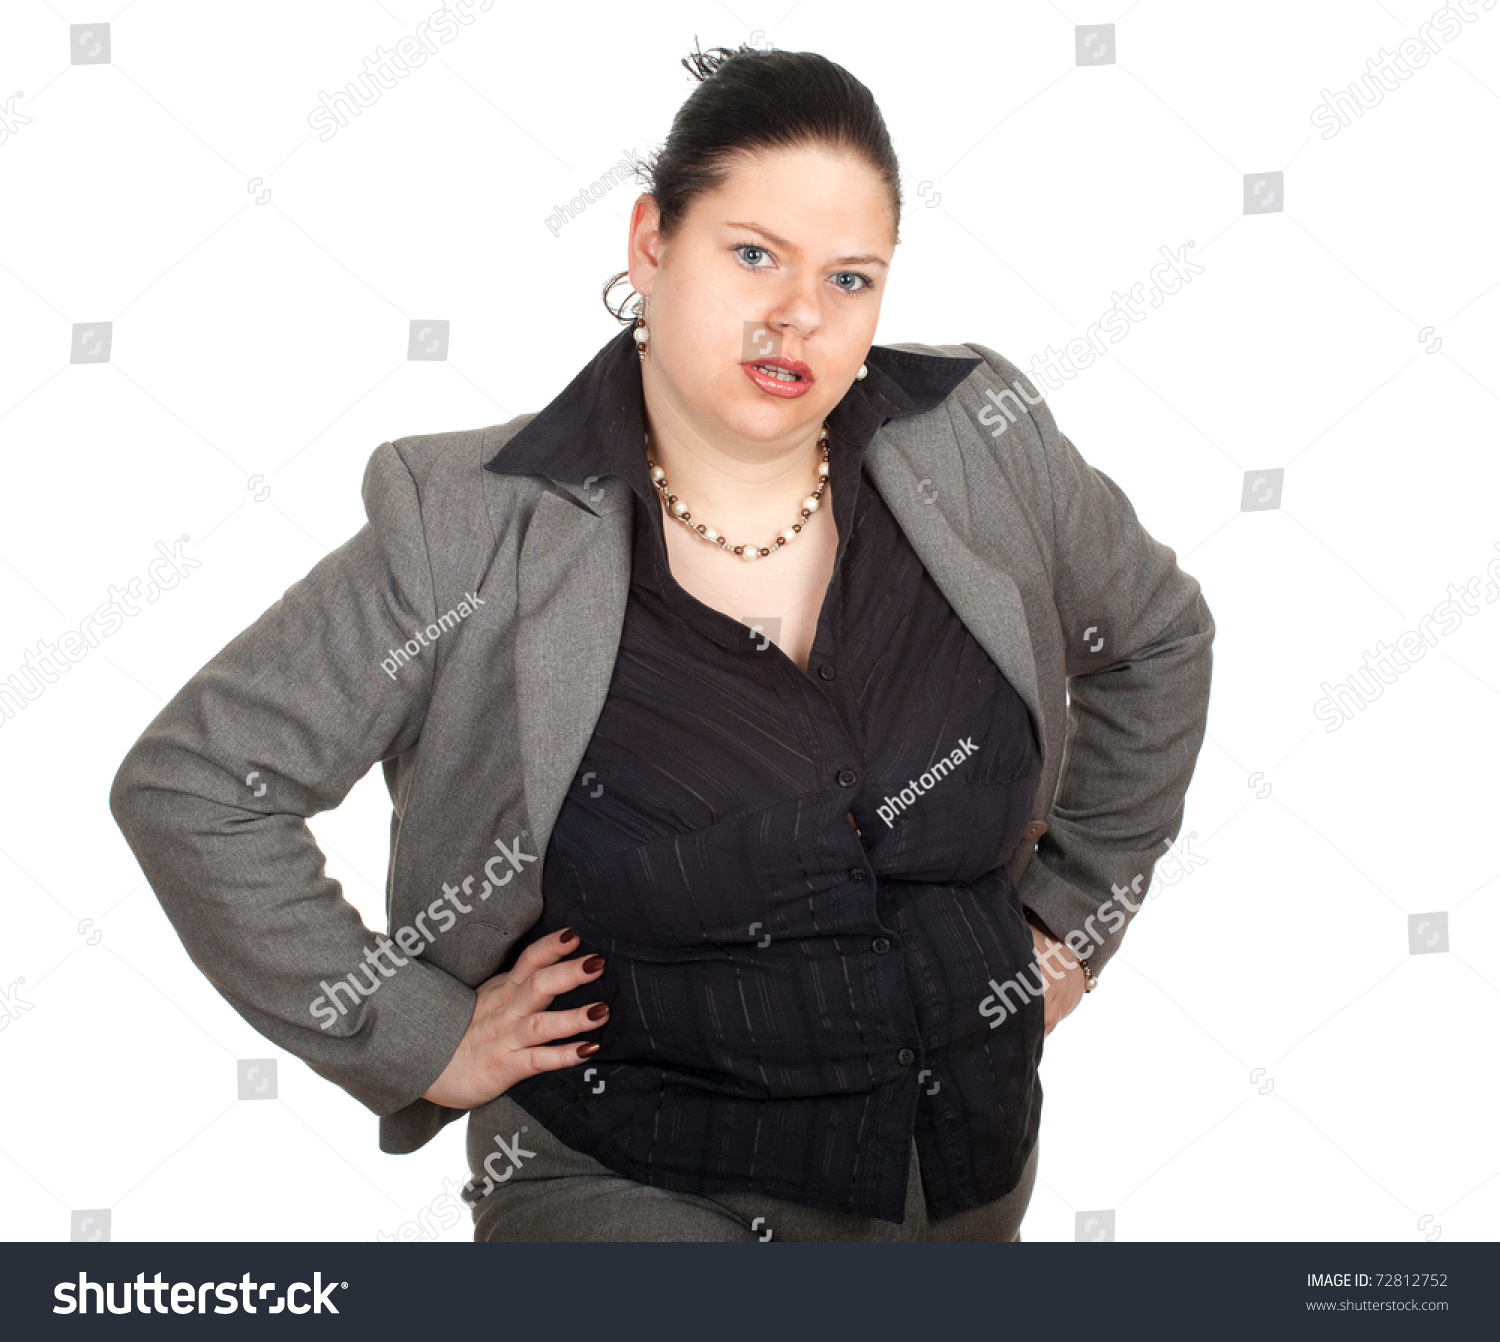 stock-photo-irritated-overweight-fat-businesswoman-in-grey-suit-72812752.jpg